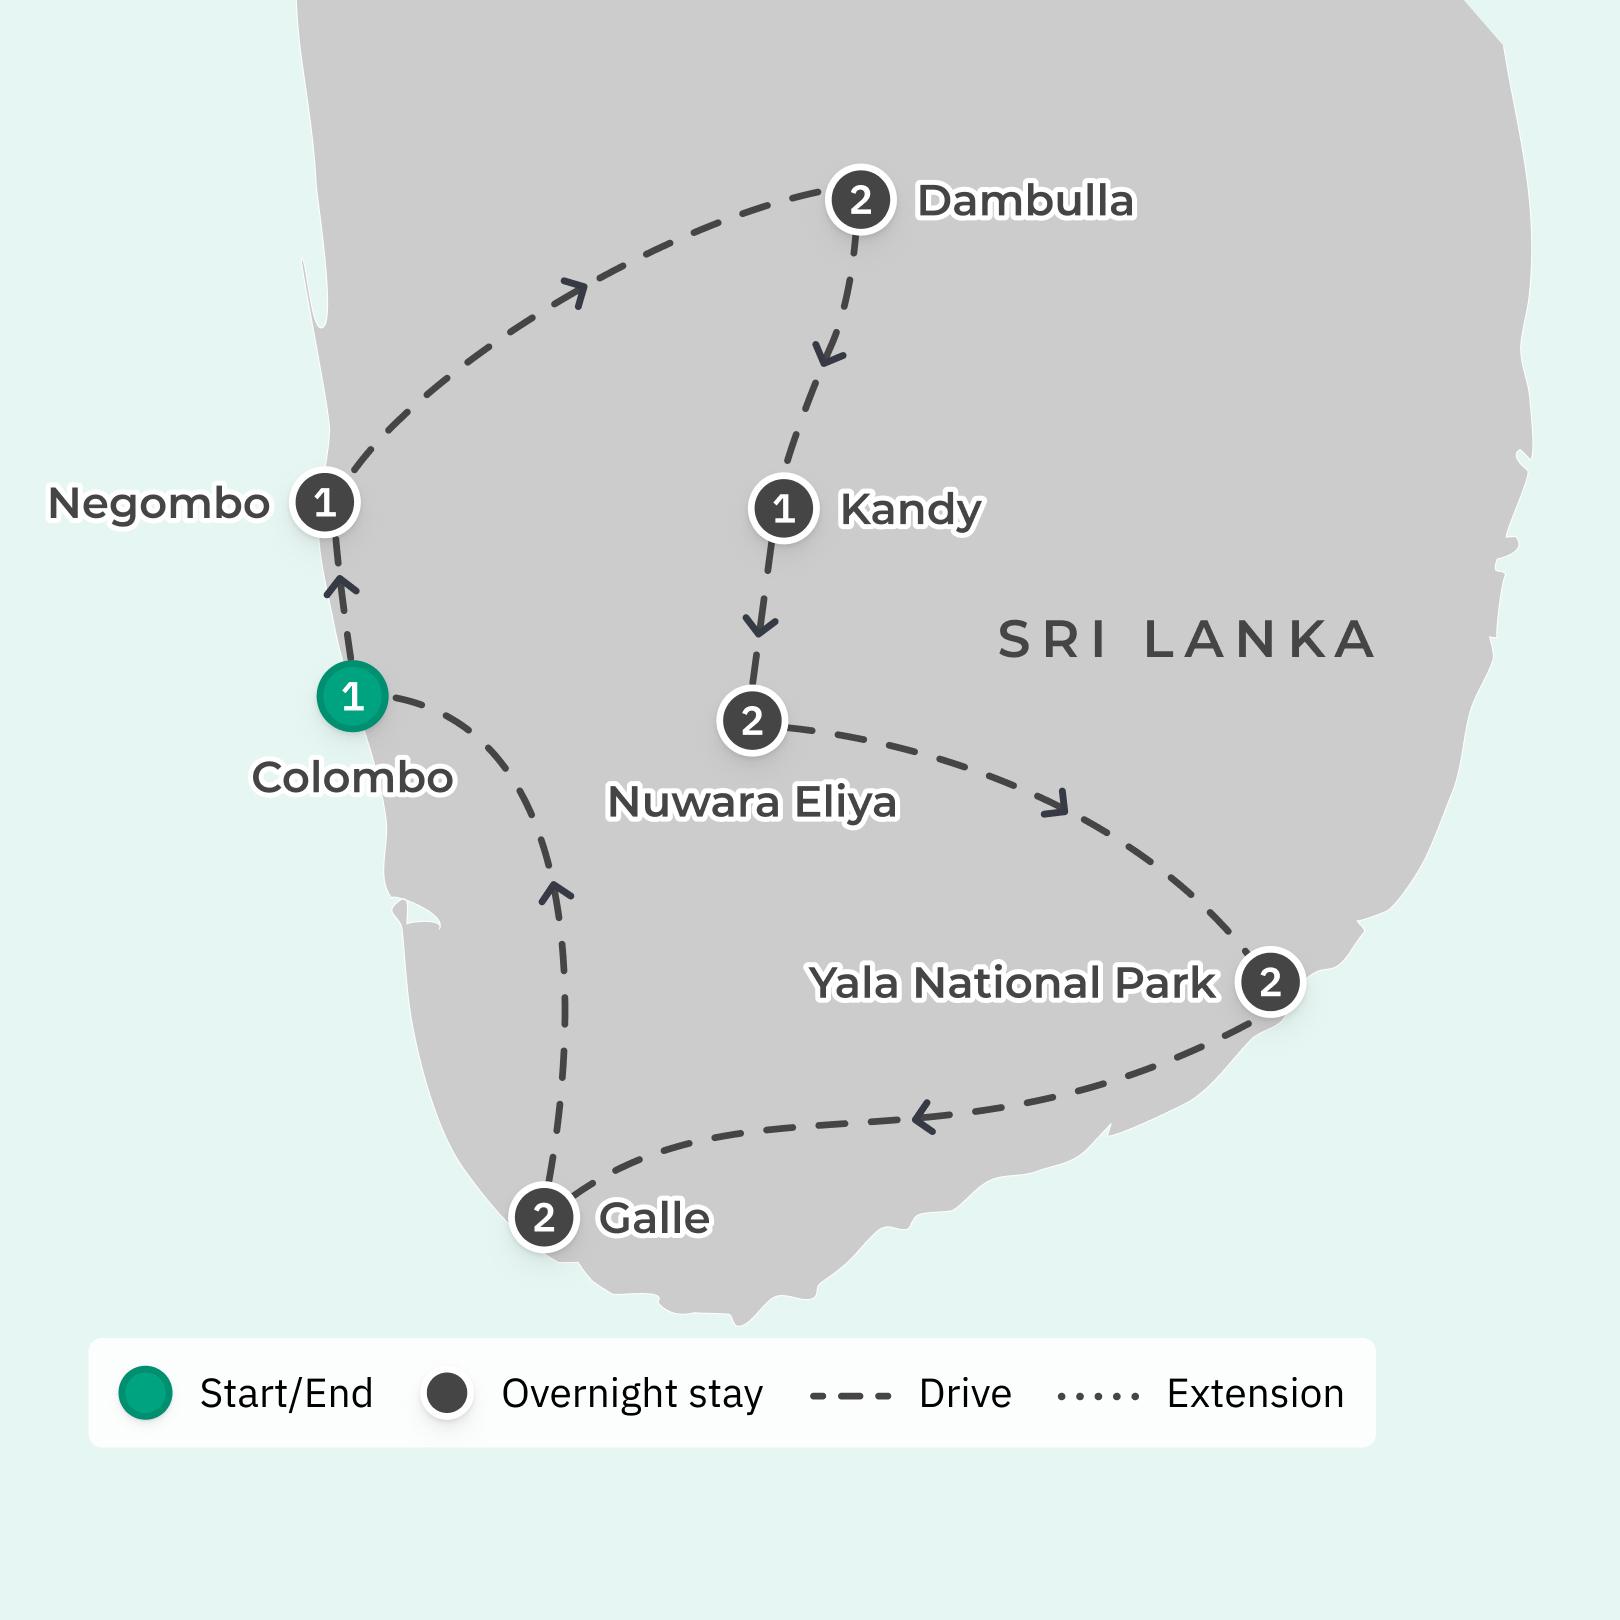 Sri Lanka Small-Group Tour with Five-Star Stays, National Park Safari, Sigiriya Rock Fortress & Galle Fort Tour route map